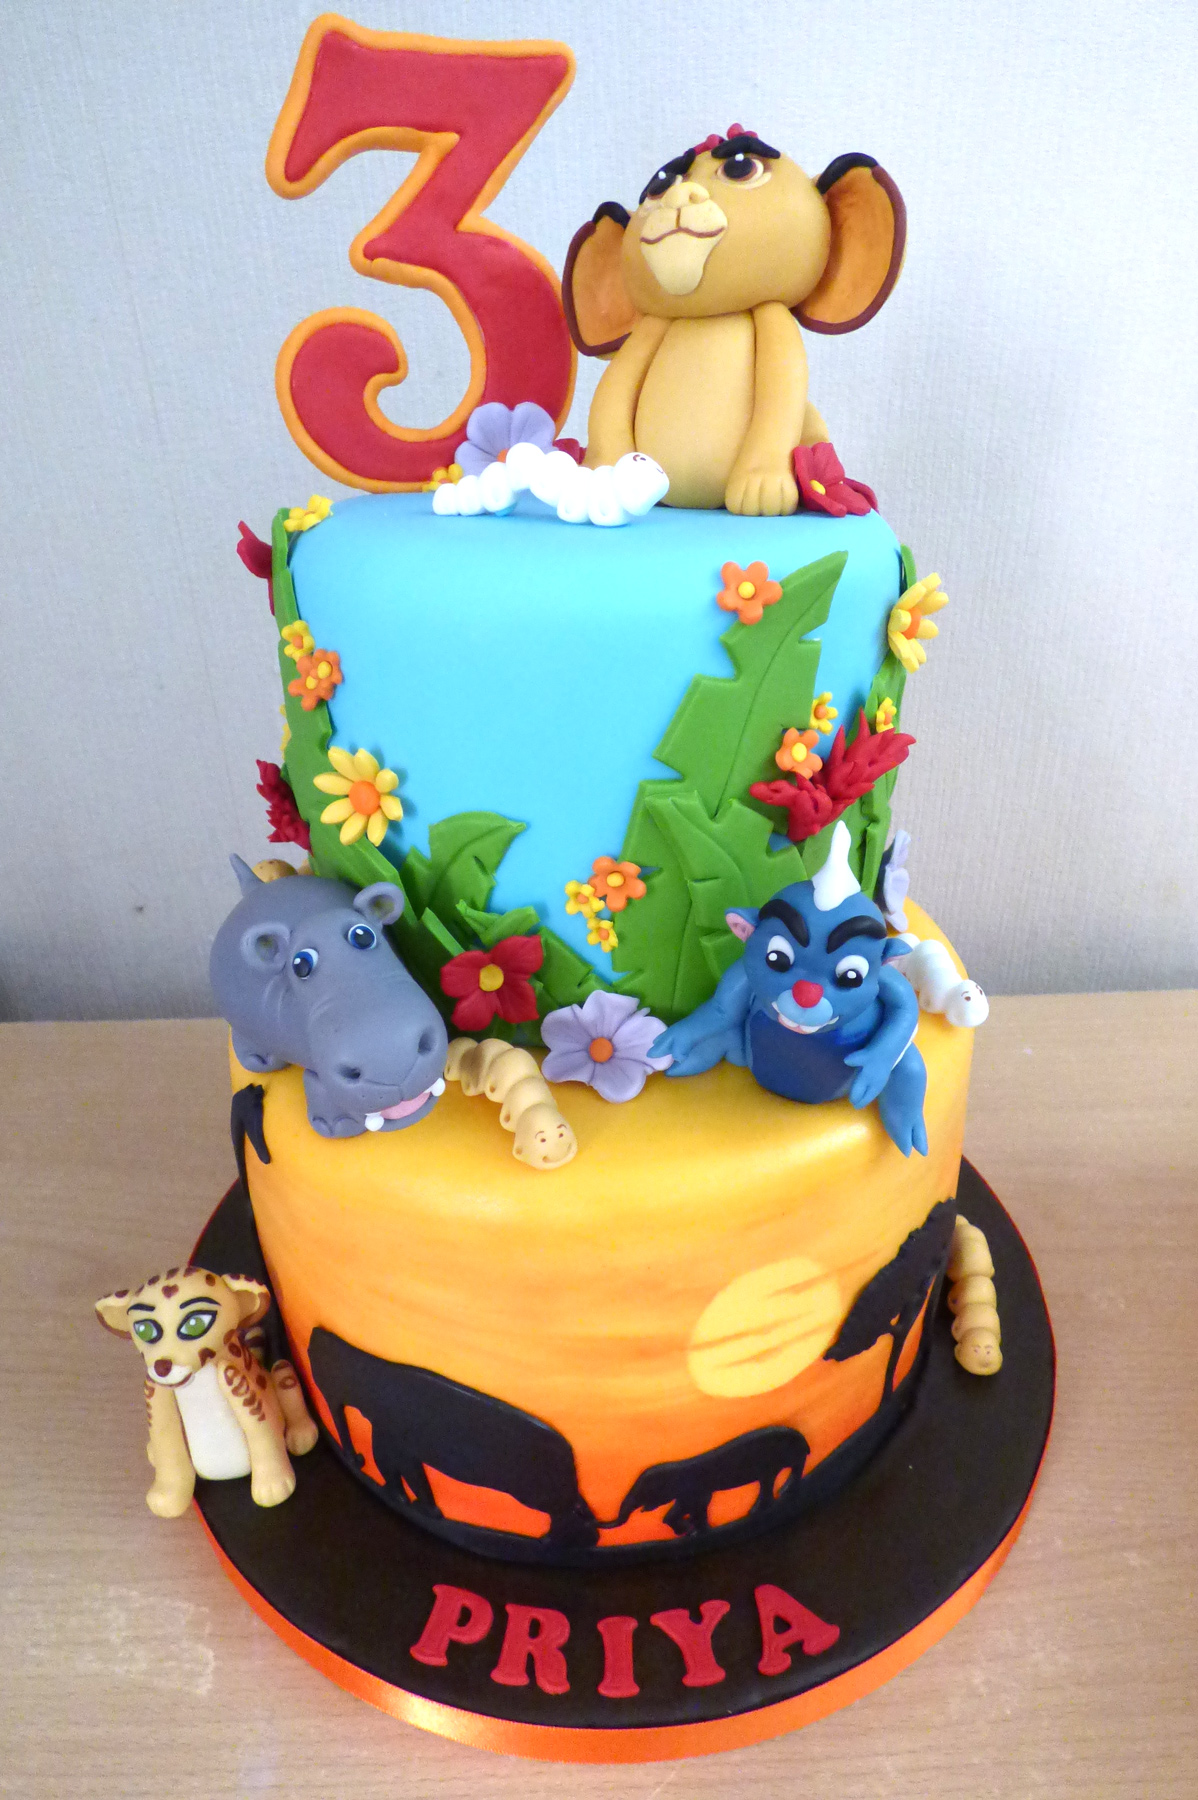 The Lion King themed Cake Tutorial - Ombre Buttercream Technique - YouTube